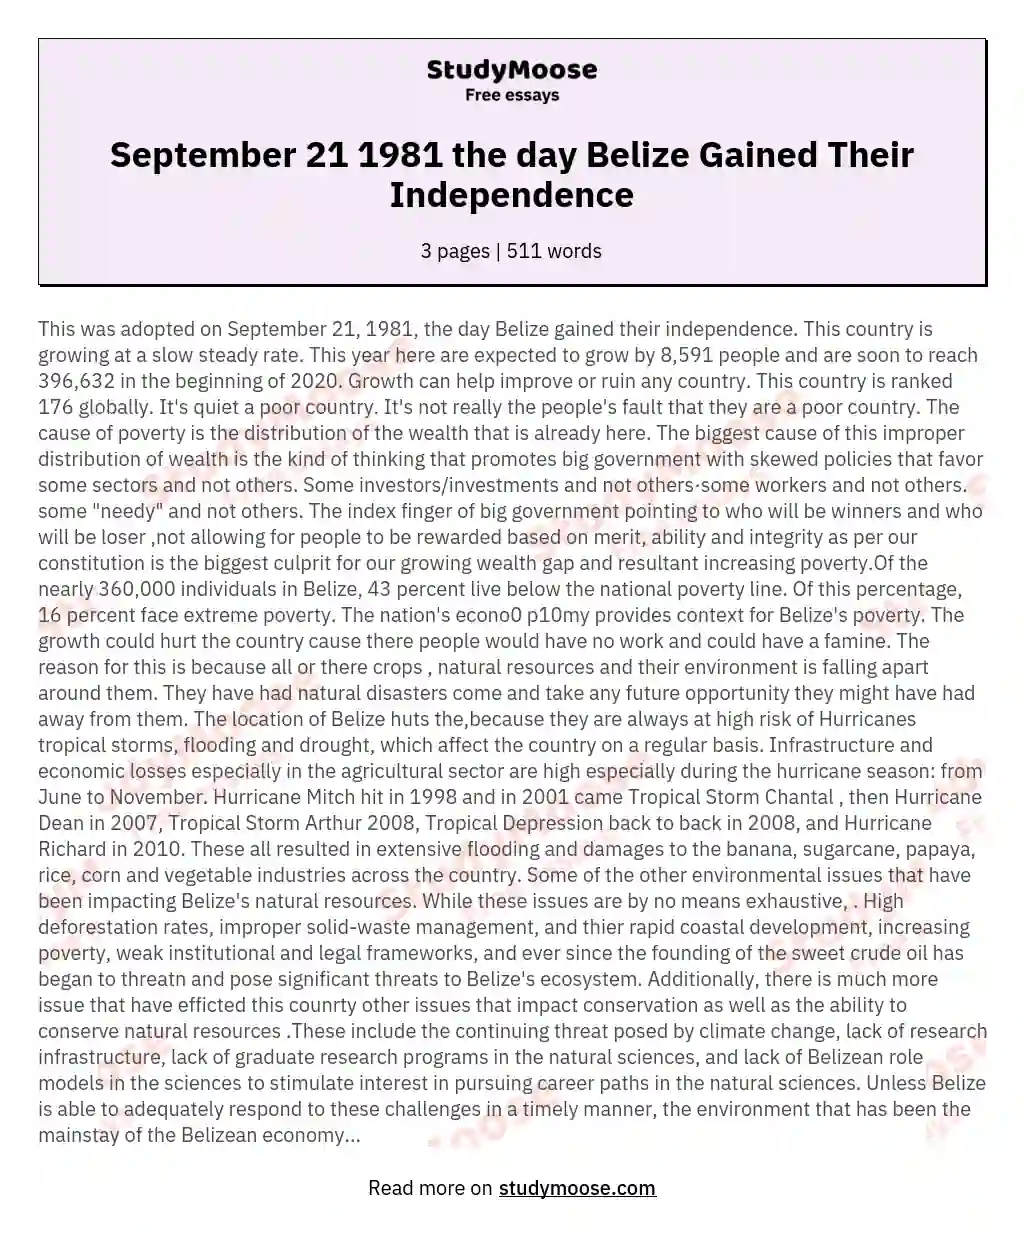 September 21 1981 the day Belize Gained Their Independence